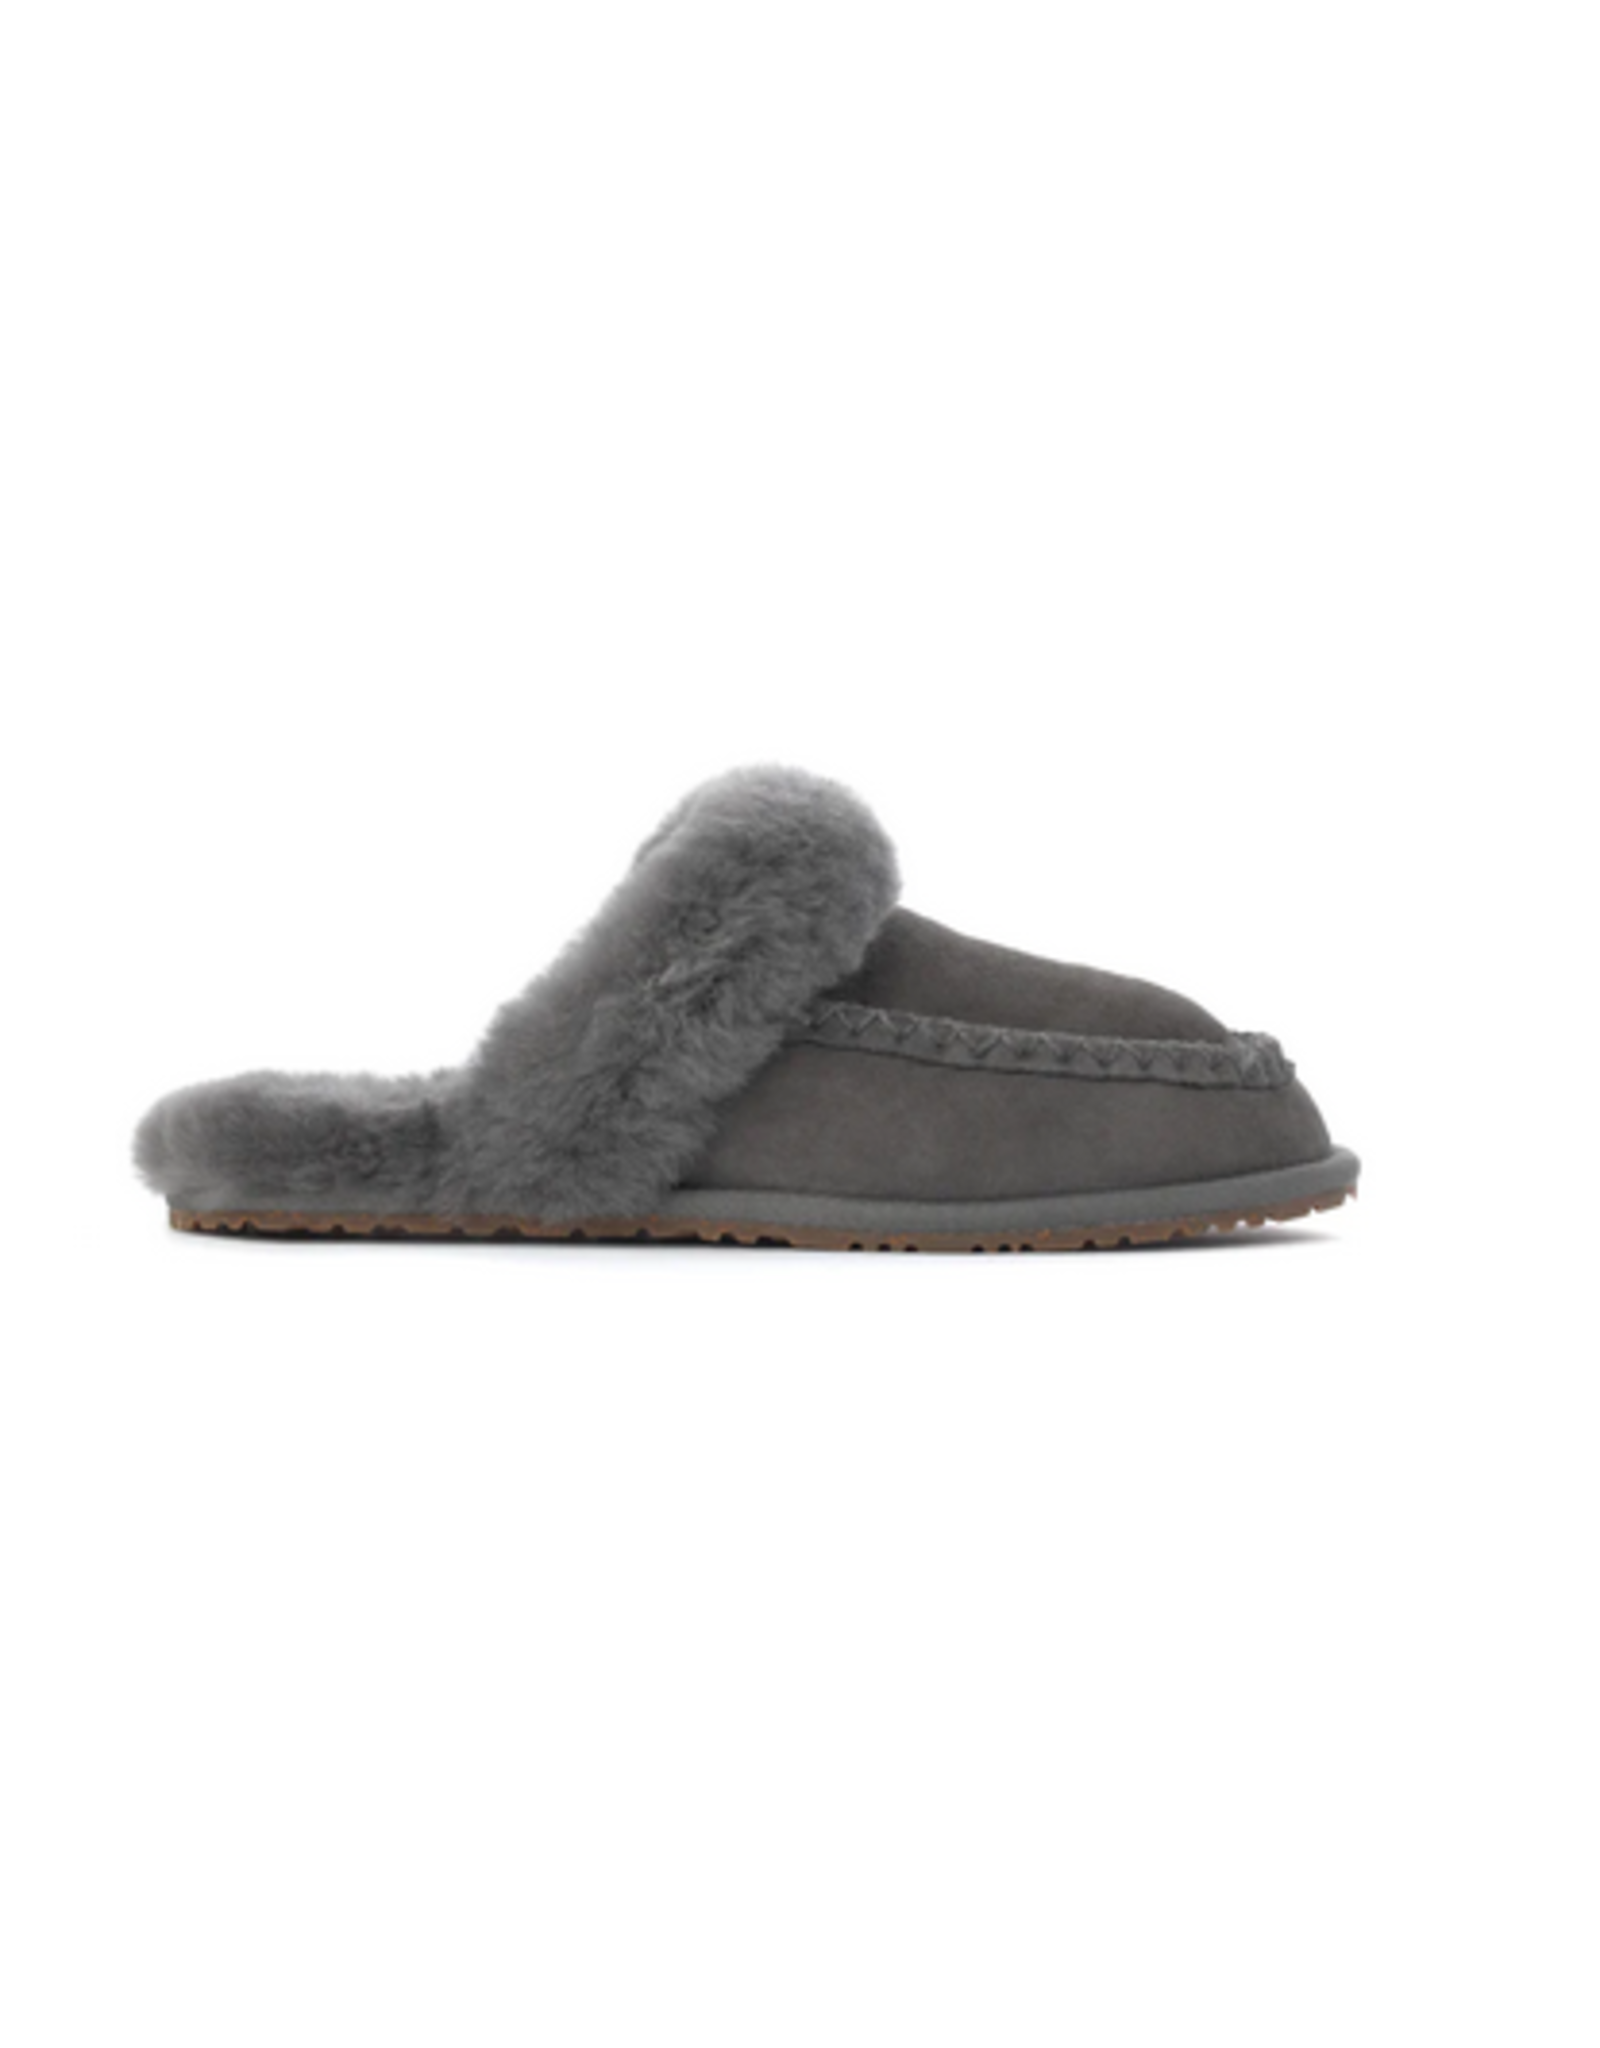 Cabin Slide with Sole - Charcoal - 937L